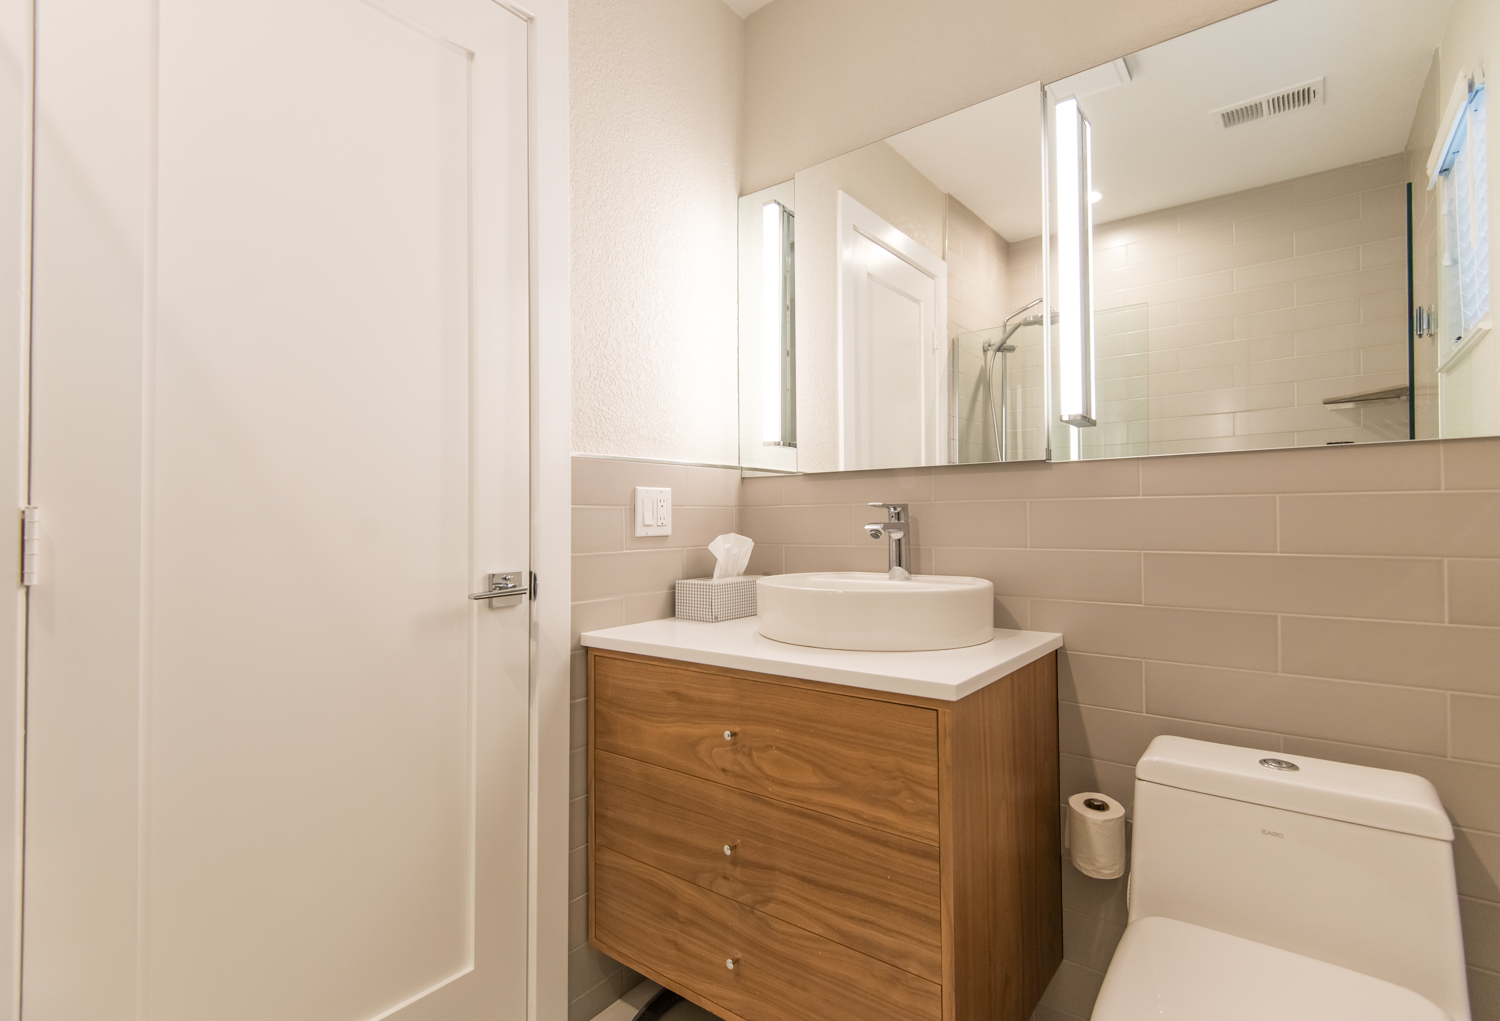 Second bath features new cabinets, Corian countertops and high-end fixtures.